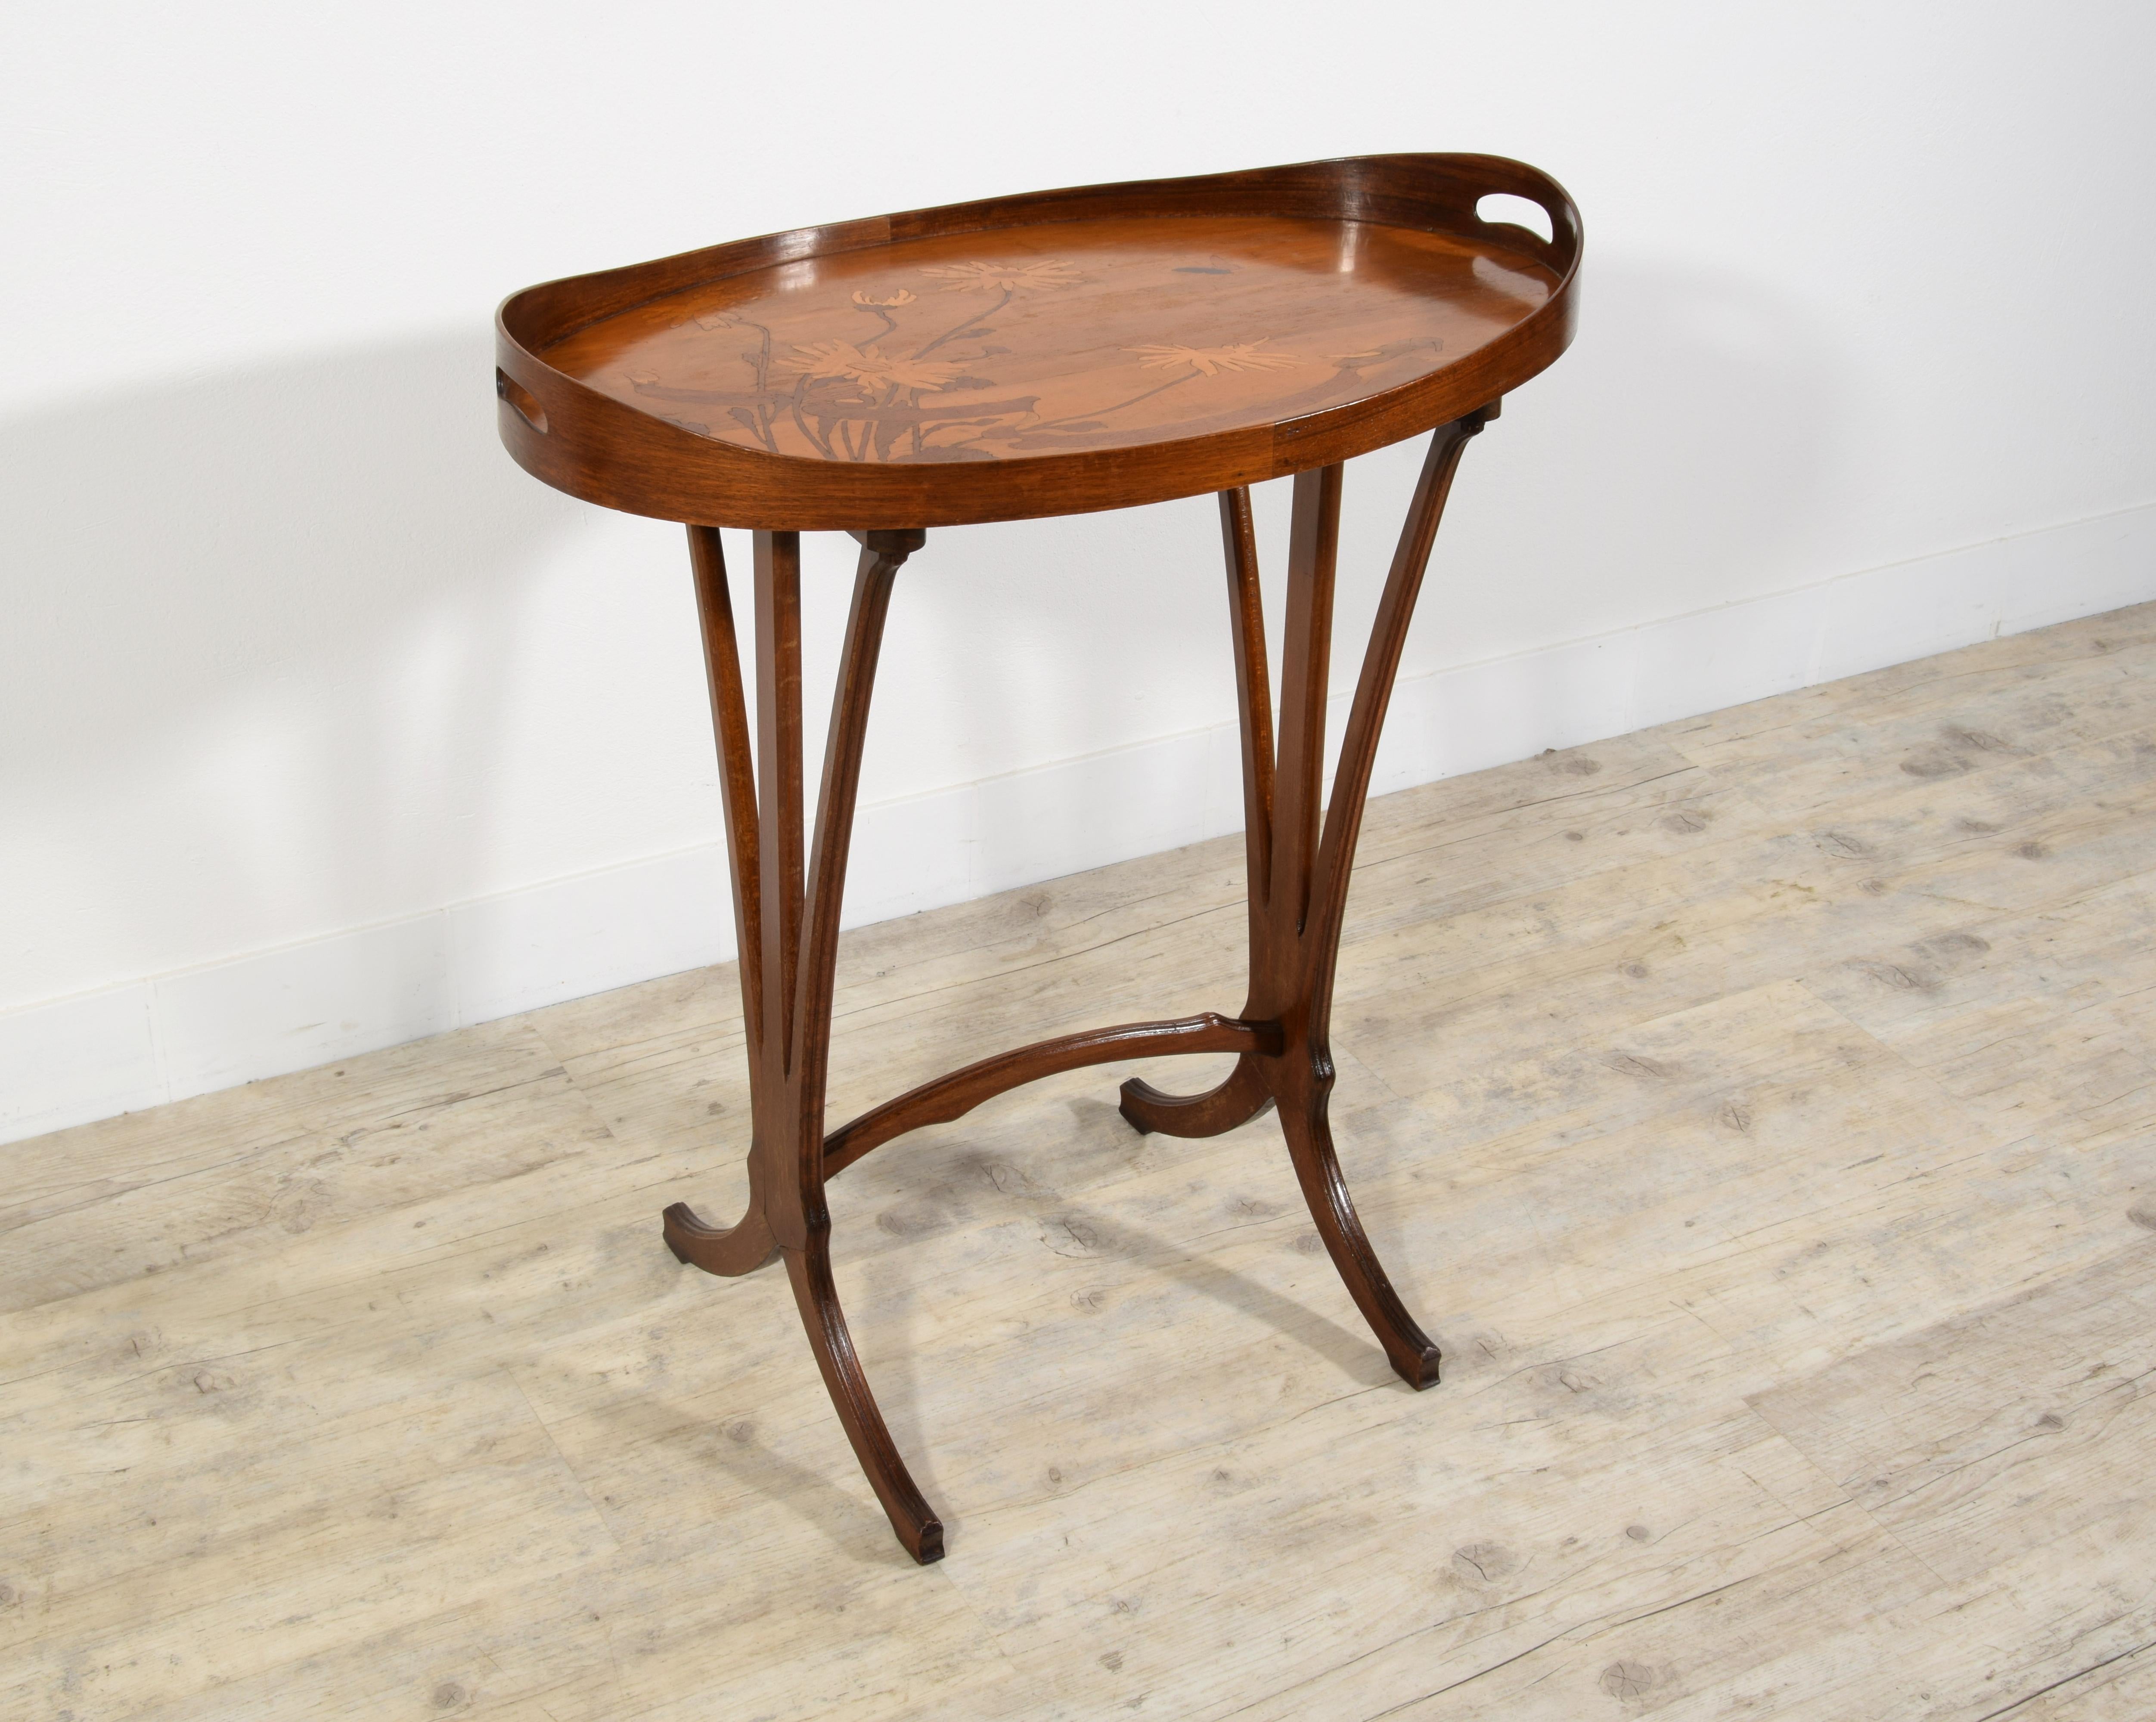 Elegant coffee table in finely inlaid wood, signed Emile Gallé (1846-1904), France

This refined coffee table is the work of the French cabinetmaker and ceramist Emile v (1846-1904). Made in the early twentieth century, it is made of wood with the